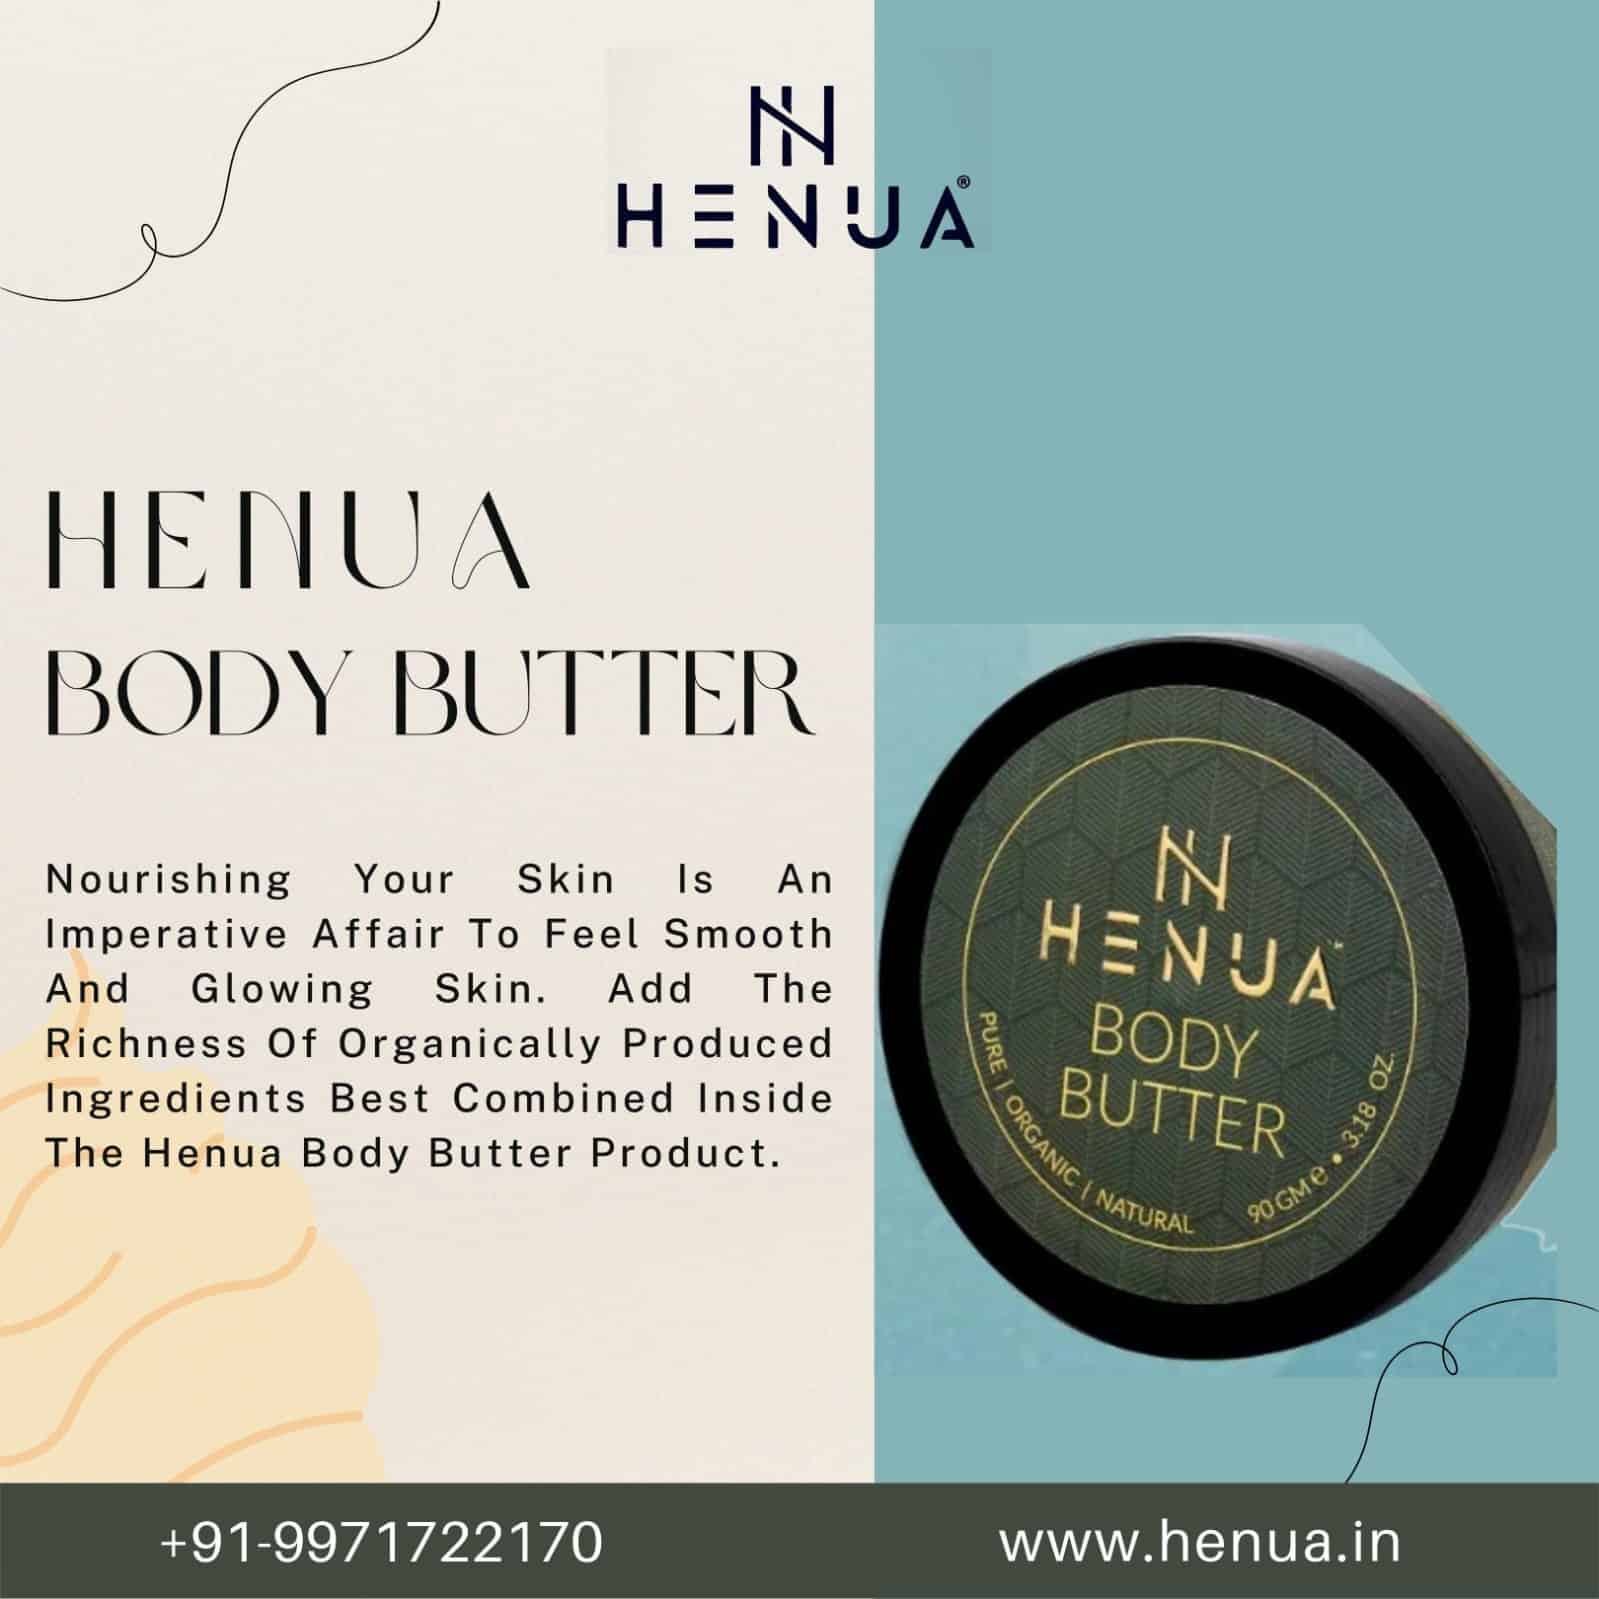 Nourish-Your-Skin-Best-With-Henua-Body-Butter